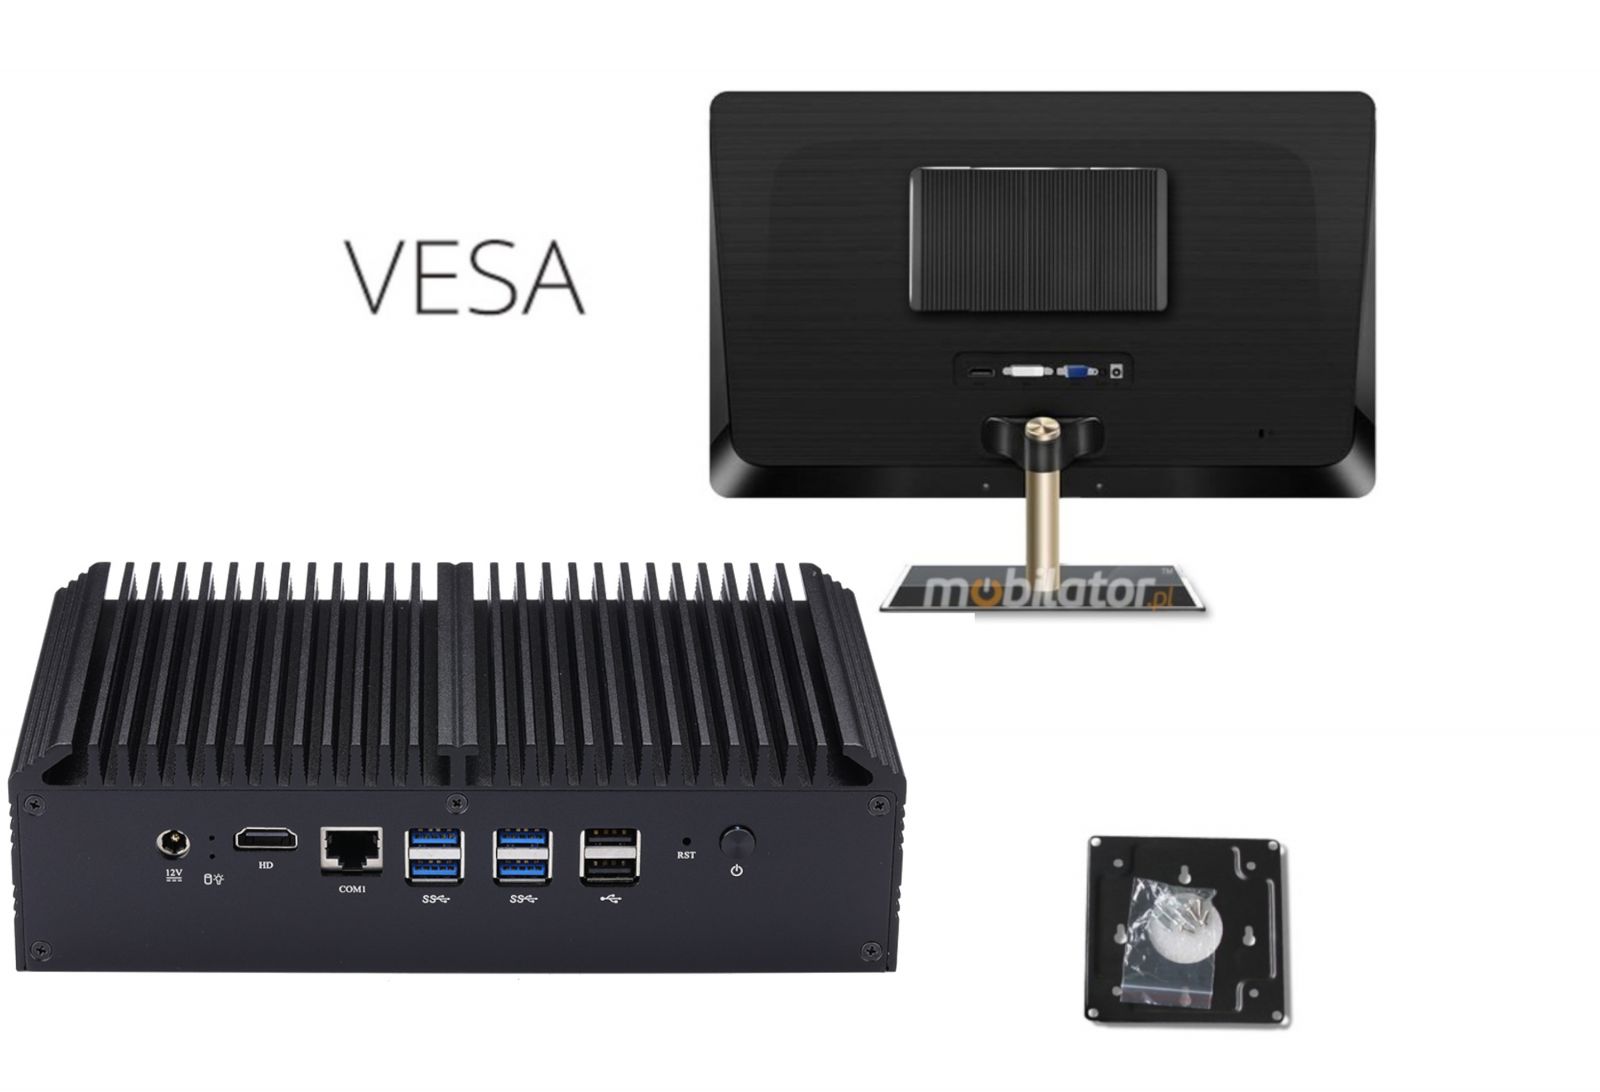 VESA bracket allows the mBOX Q838GE to be mounted on machine surfaces